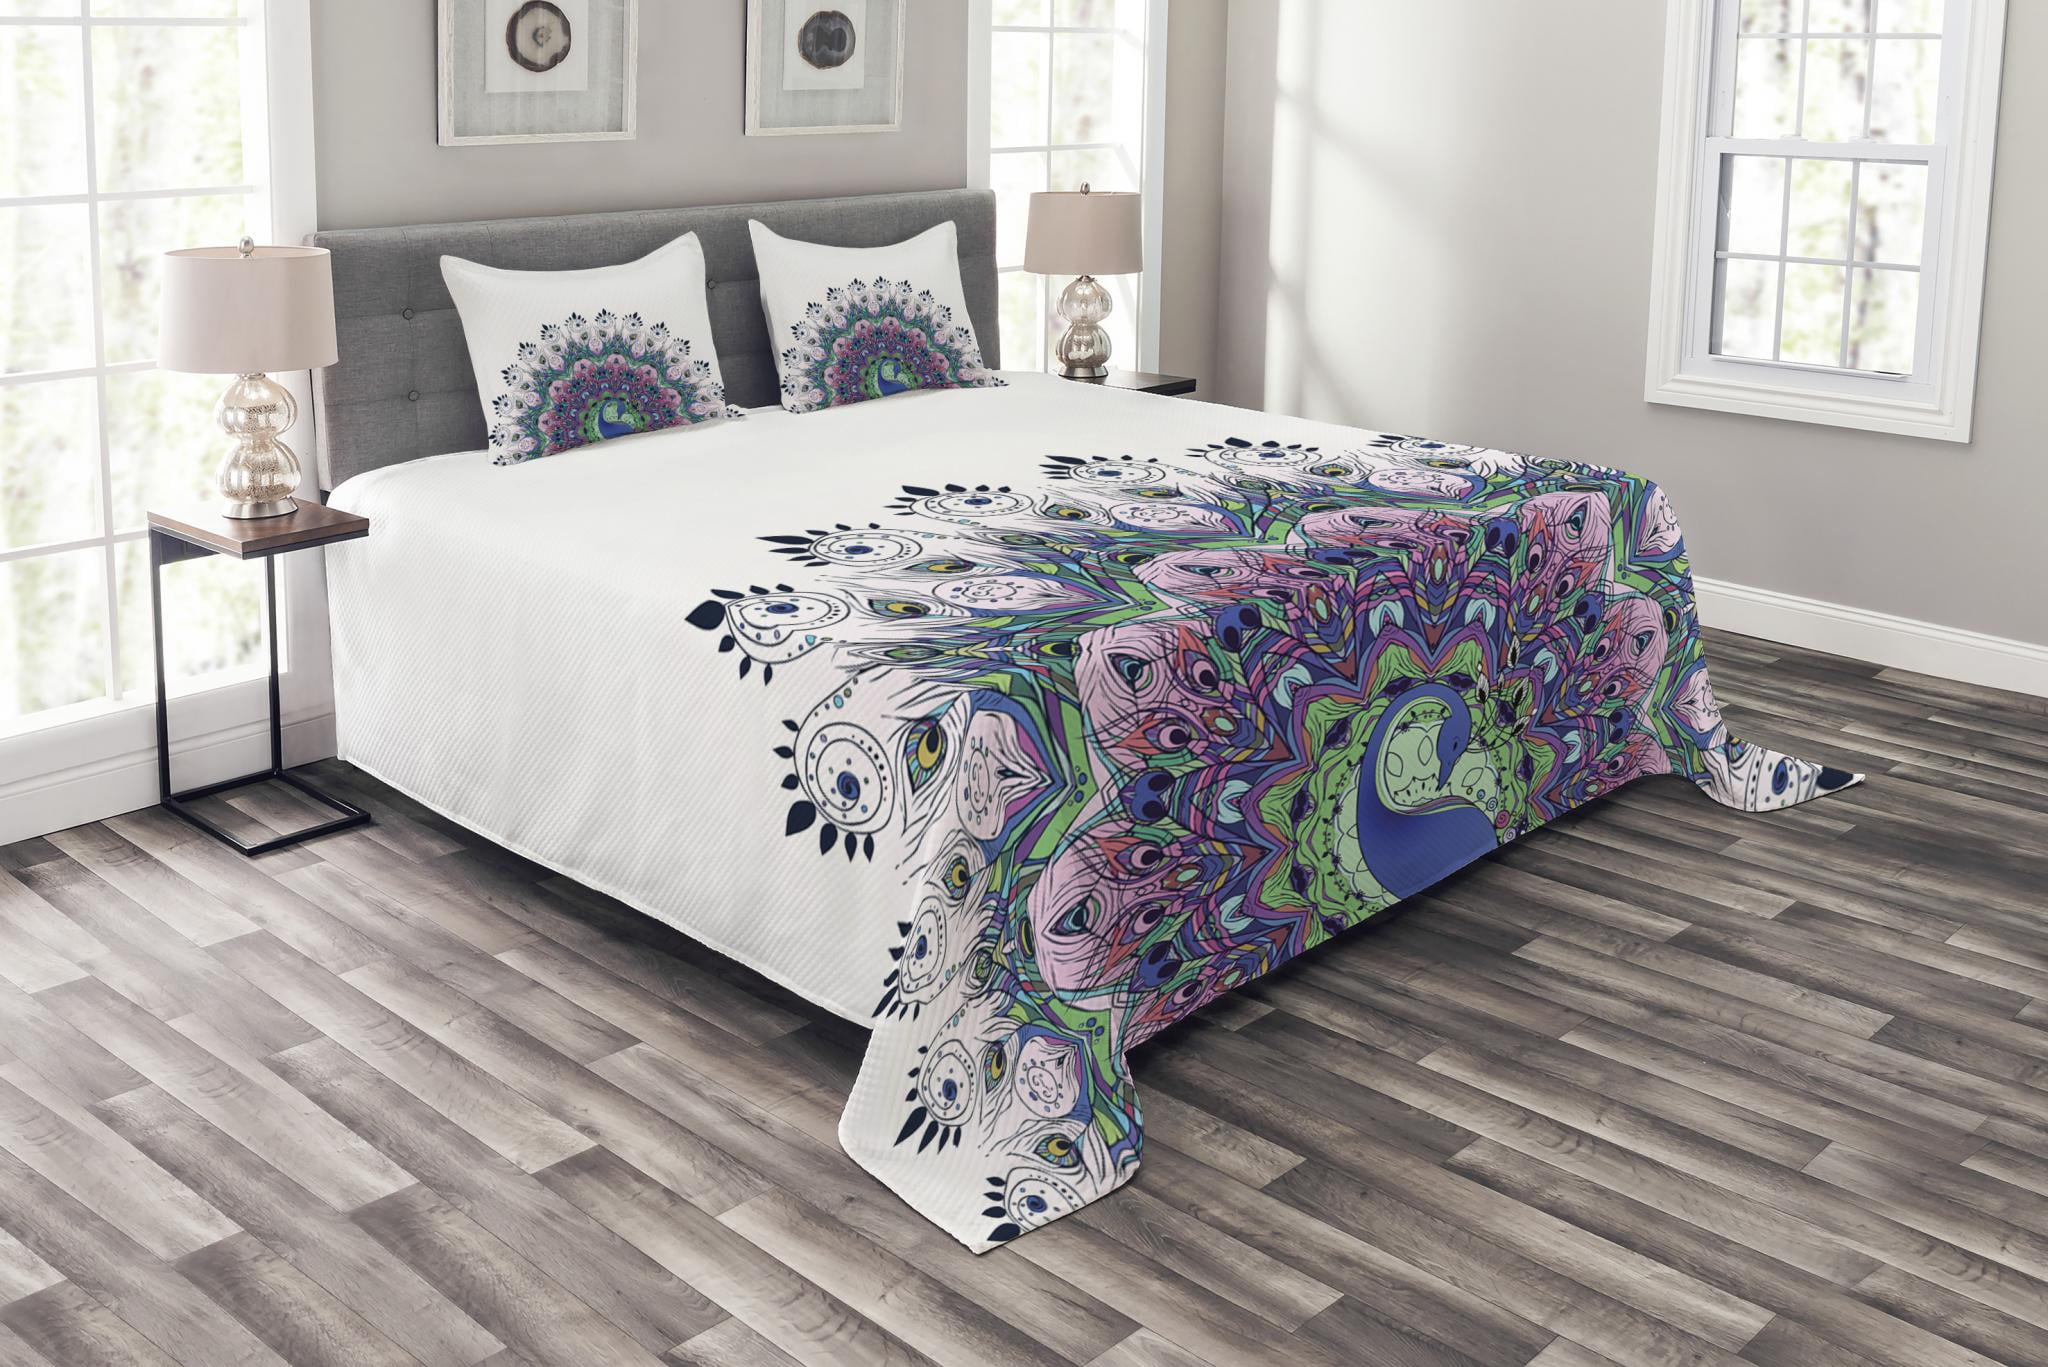 Peacock Quilted Bedspread & Pillow Shams Set Exotic Animal Feathers Print 